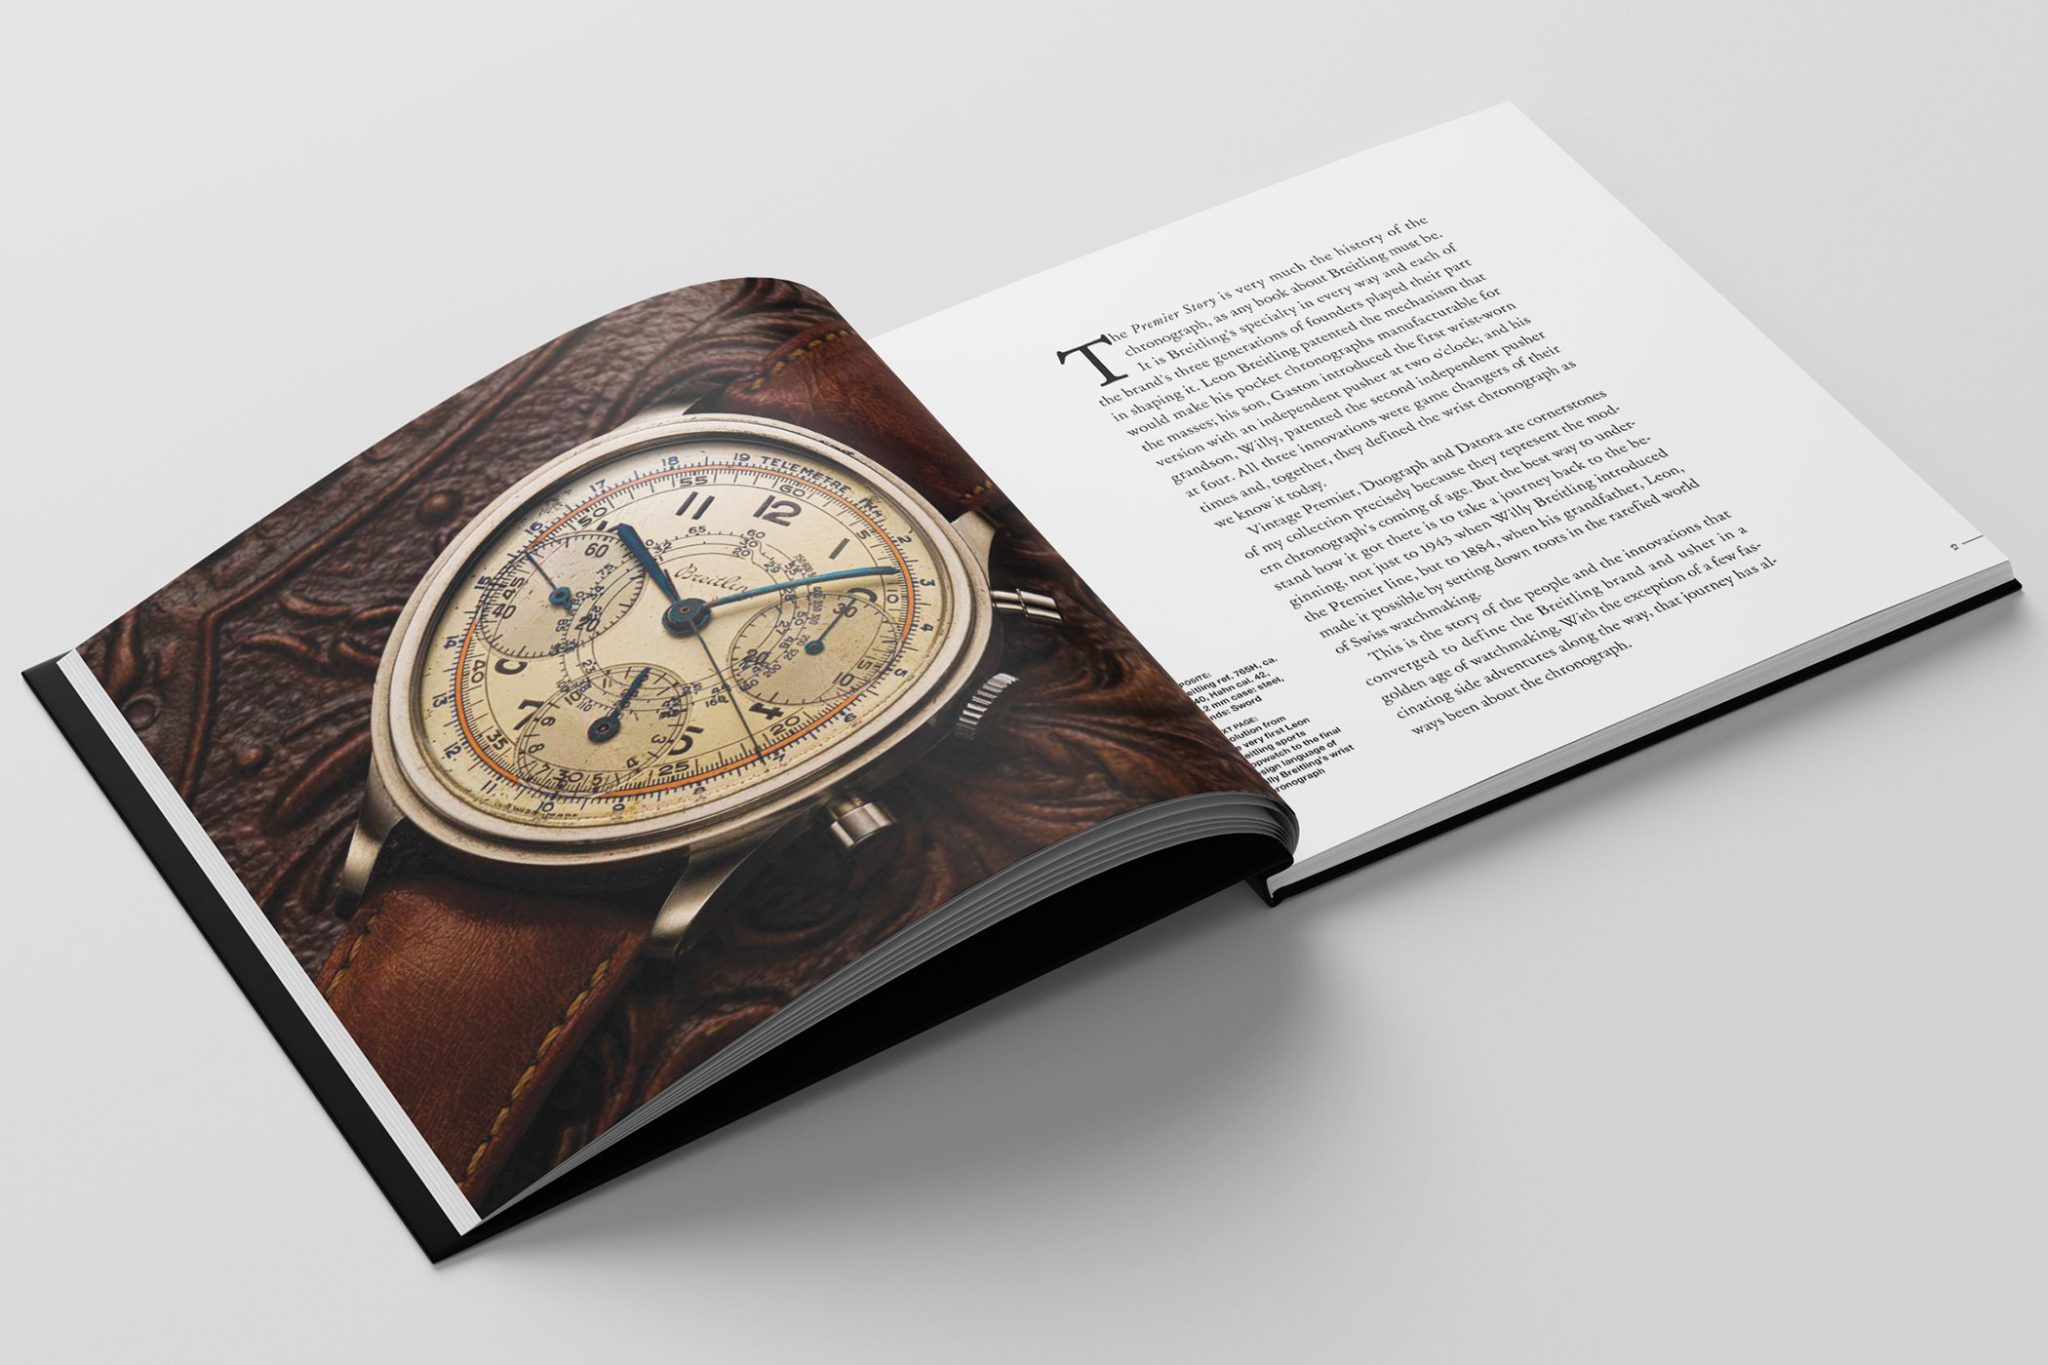 Book-from-Watchprint-Breitling-Premier-Story-2